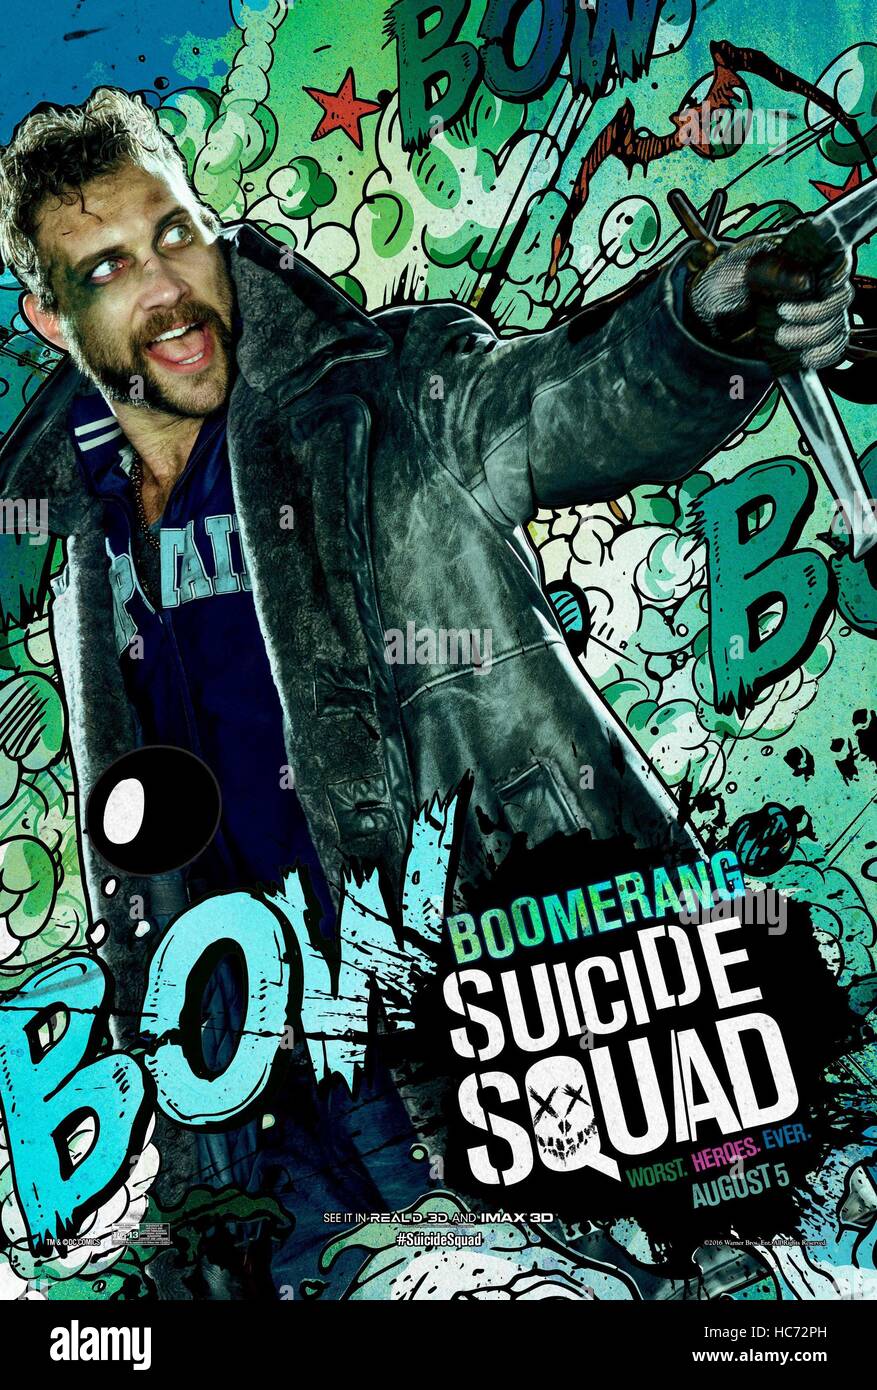 RELEASE DATE: August 5, 2016 TITLE: Suicide Squad STUDIO: Atlas Entertainment DIRECTOR: David Ayer PLOT: A secret government agency recruits imprisoned supervillains to execute dangerous black ops missions in exchange for clemency STARRING: Jai Courtney as Boomerang poster (Credit Image: c Atlas Entertainment/Entertainment Pictures/) Stock Photo